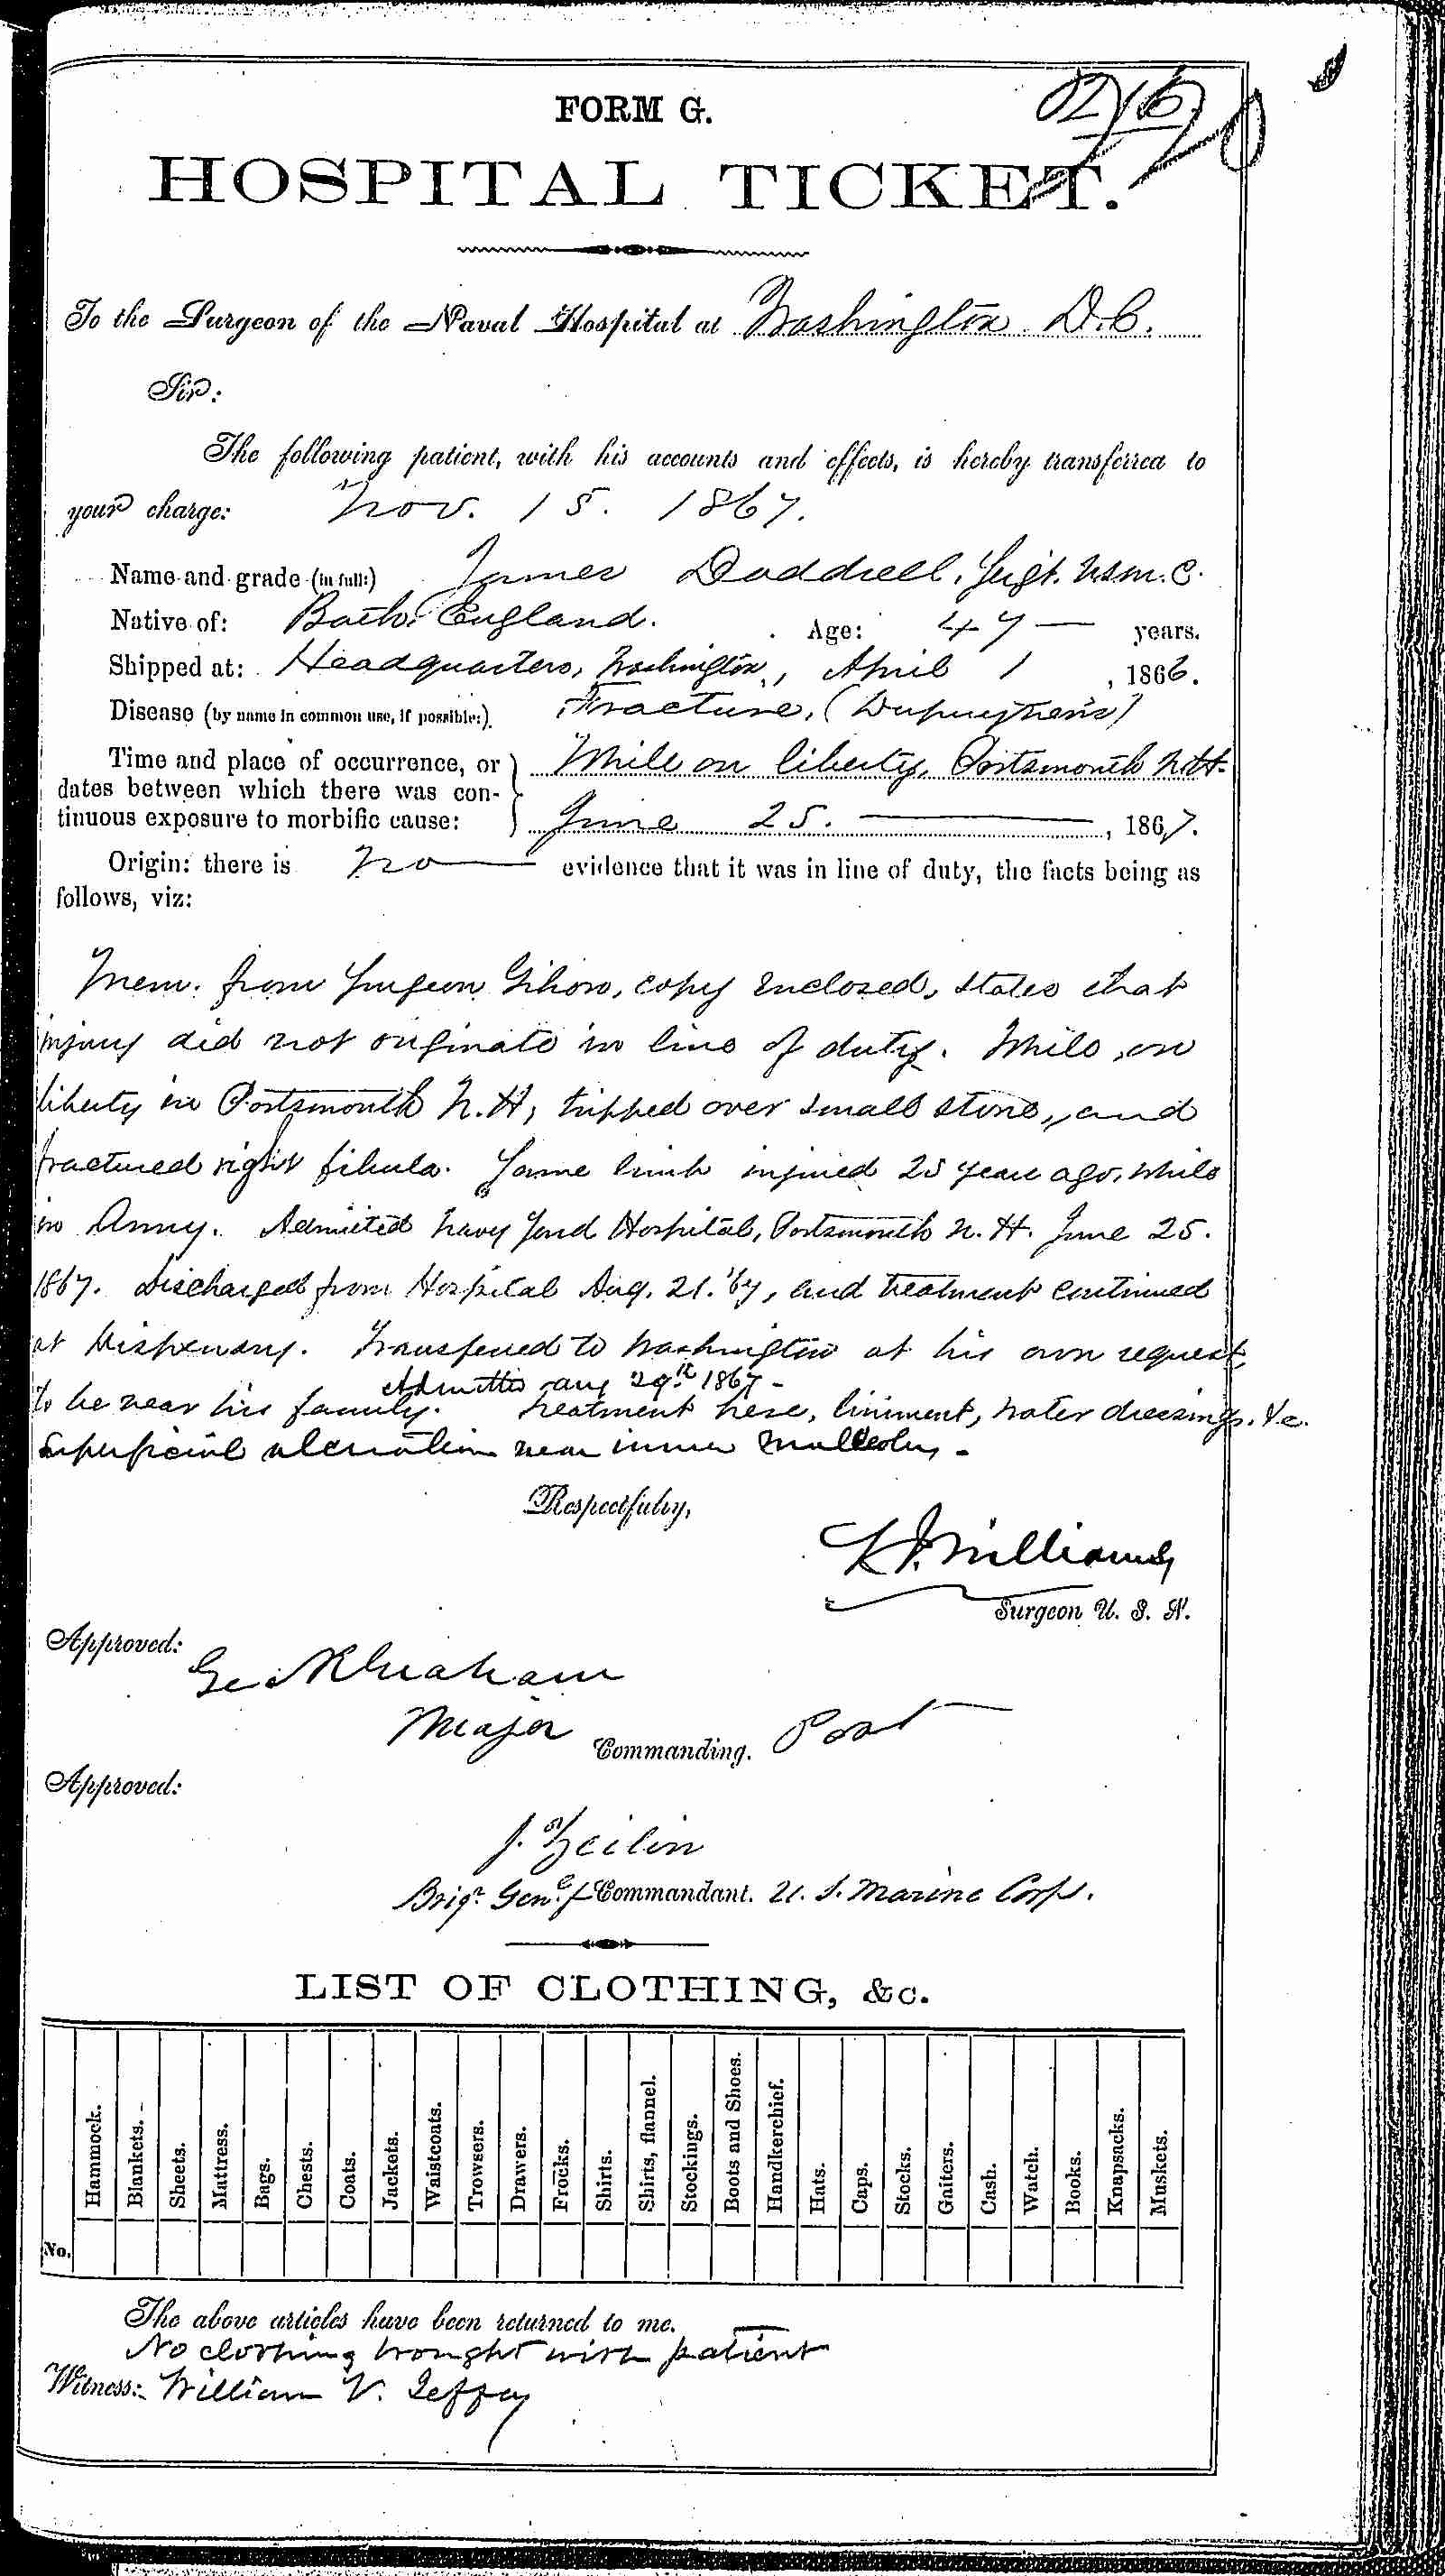 Entry for James Doddrell (second admission page 1 of 2) in the log Hospital Tickets and Case Papers - Naval Hospital - Washington, D.C. - 1866-68